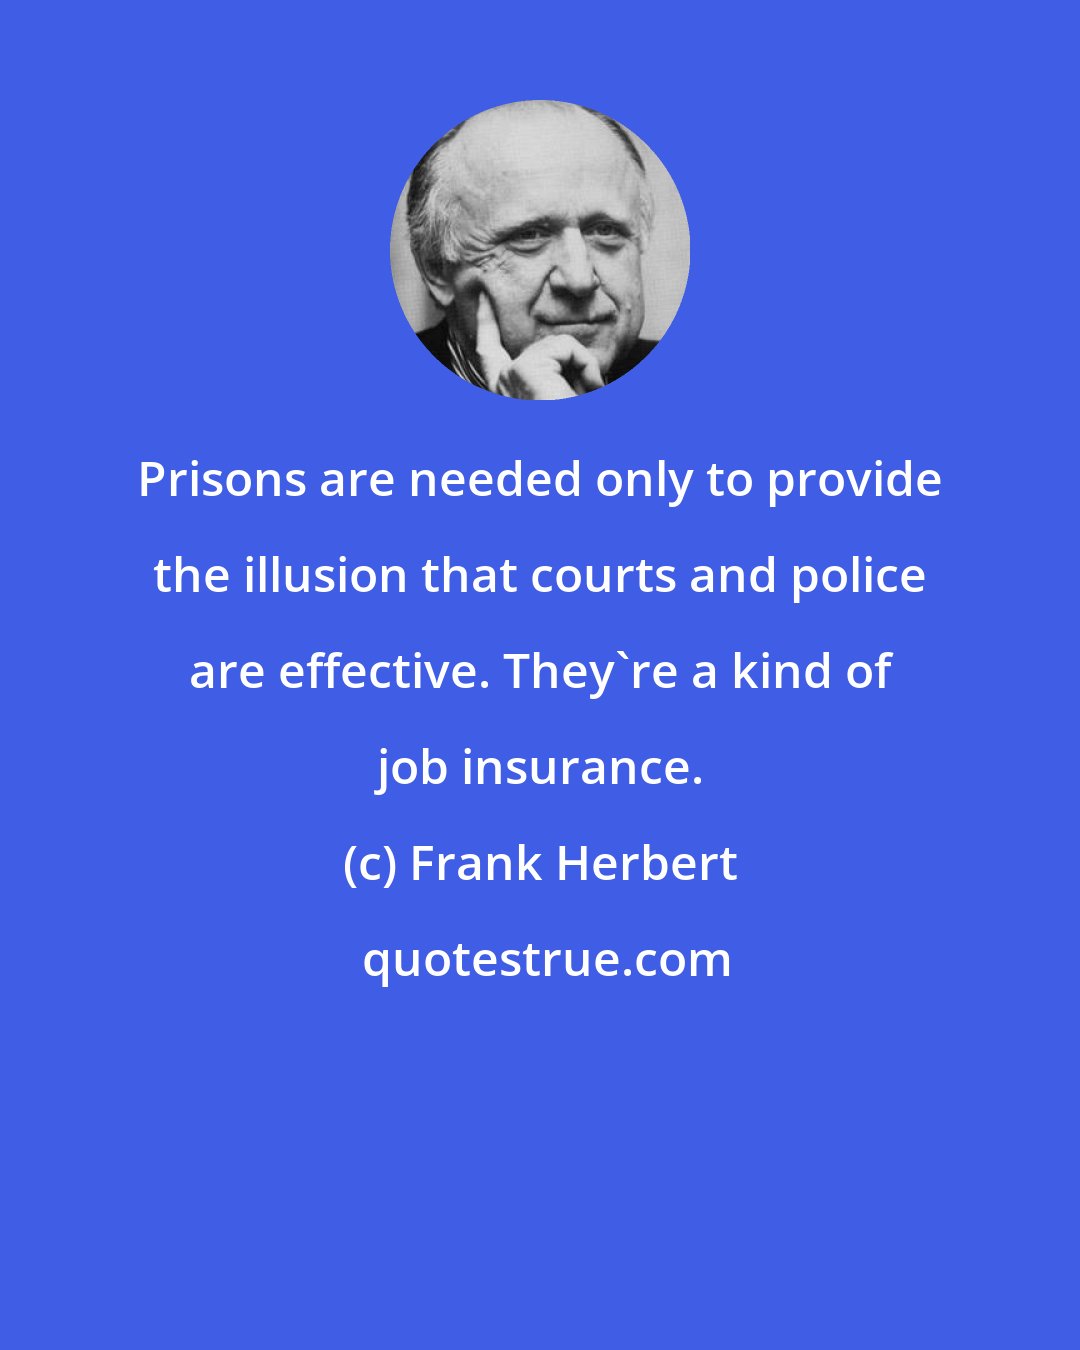 Frank Herbert: Prisons are needed only to provide the illusion that courts and police are effective. They're a kind of job insurance.